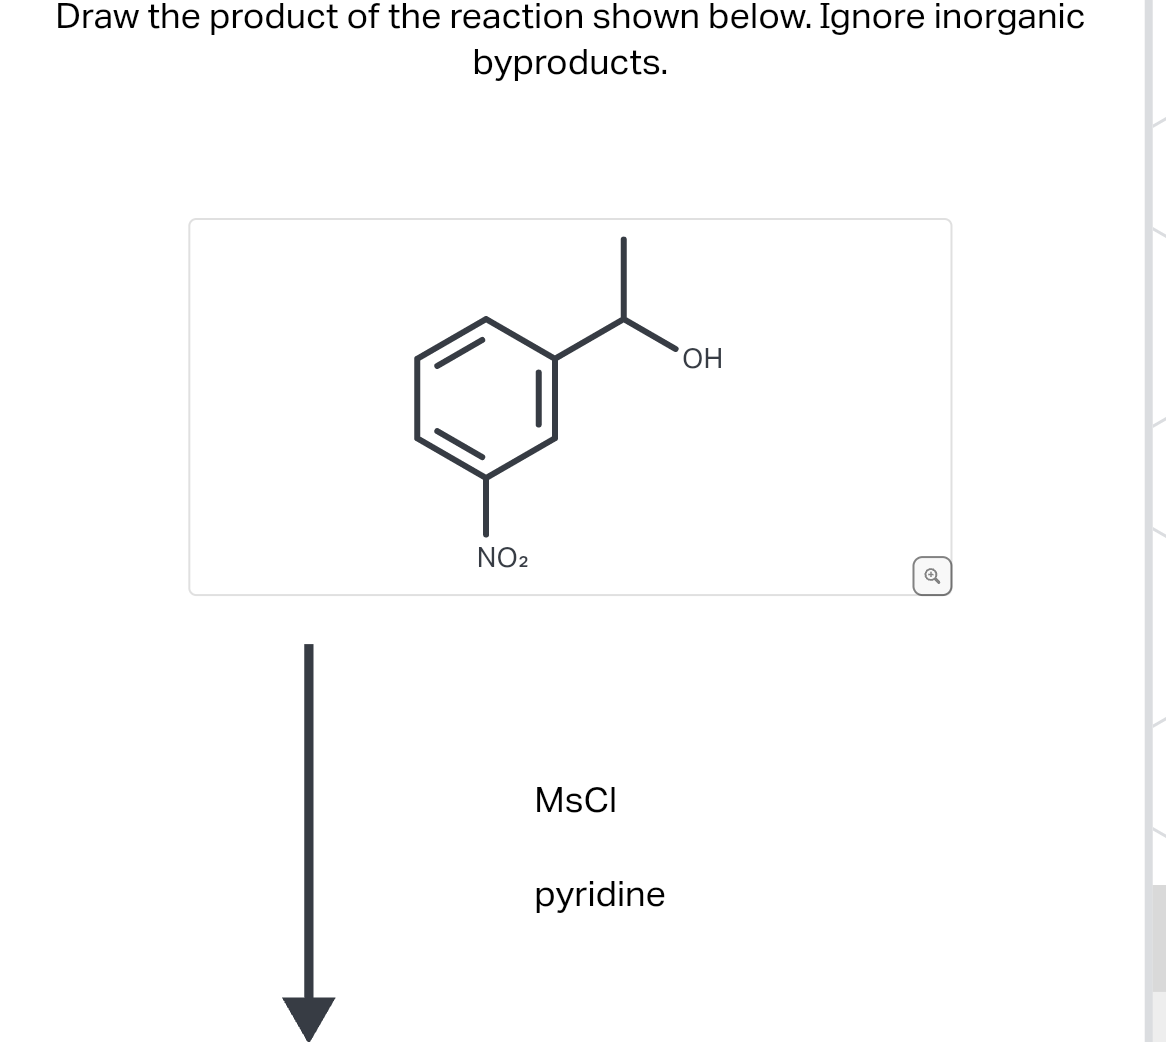 Draw the product of the reaction shown below. Ignore inorganic
byproducts.
NO₂
MsCI
pyridine
OH
Q